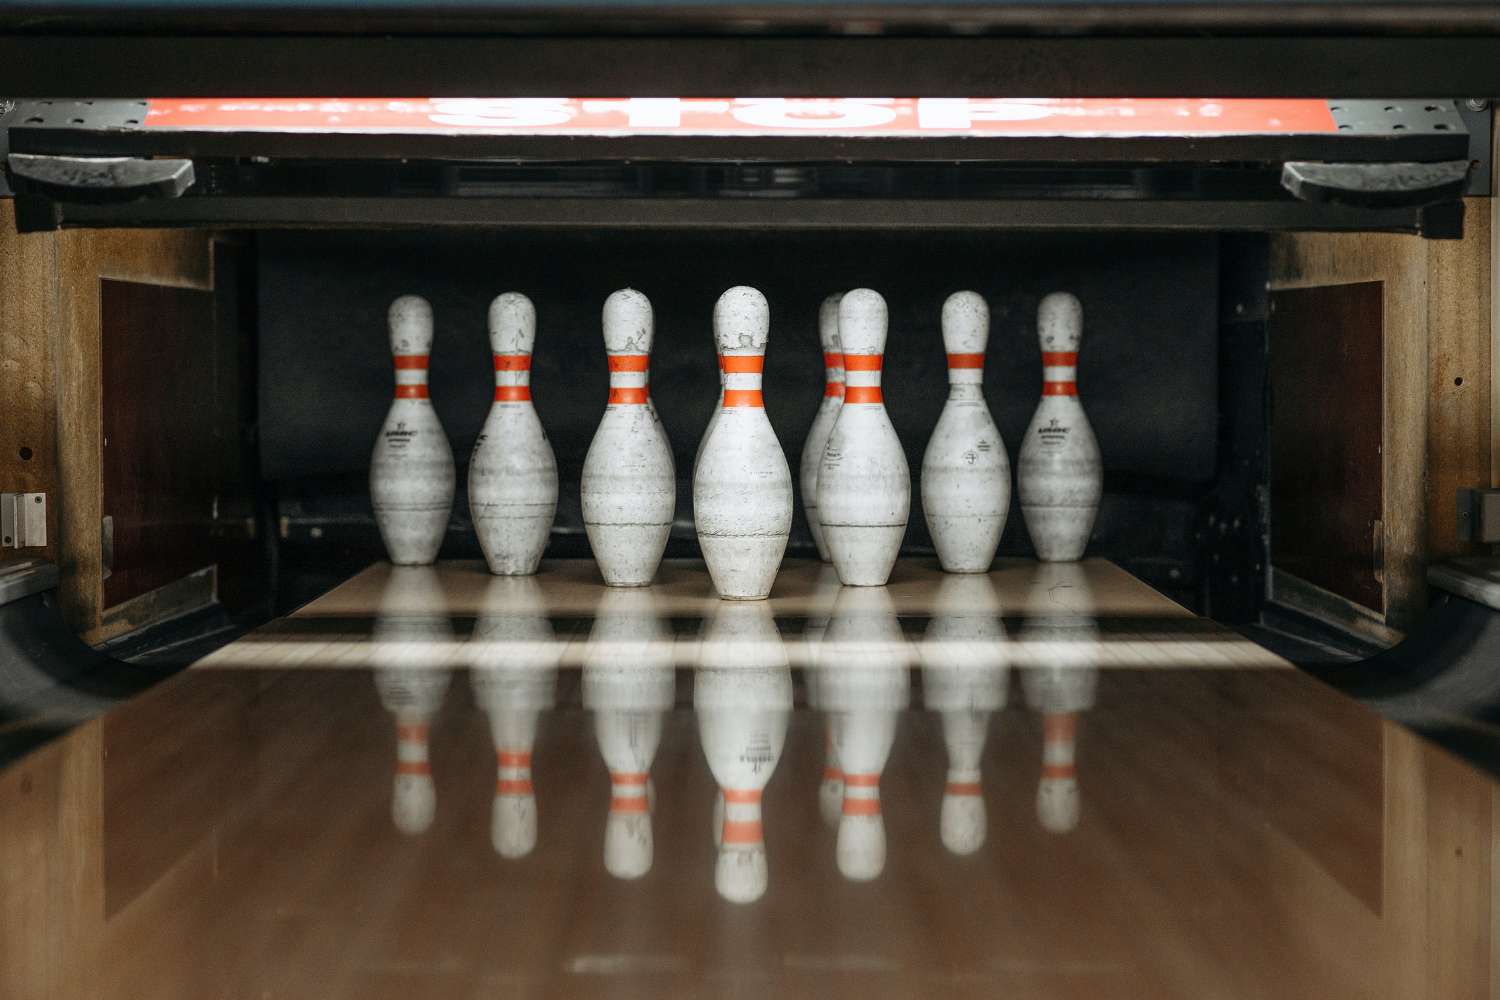 What Is a Turkey in Bowling? Strike Hat Trick Defined